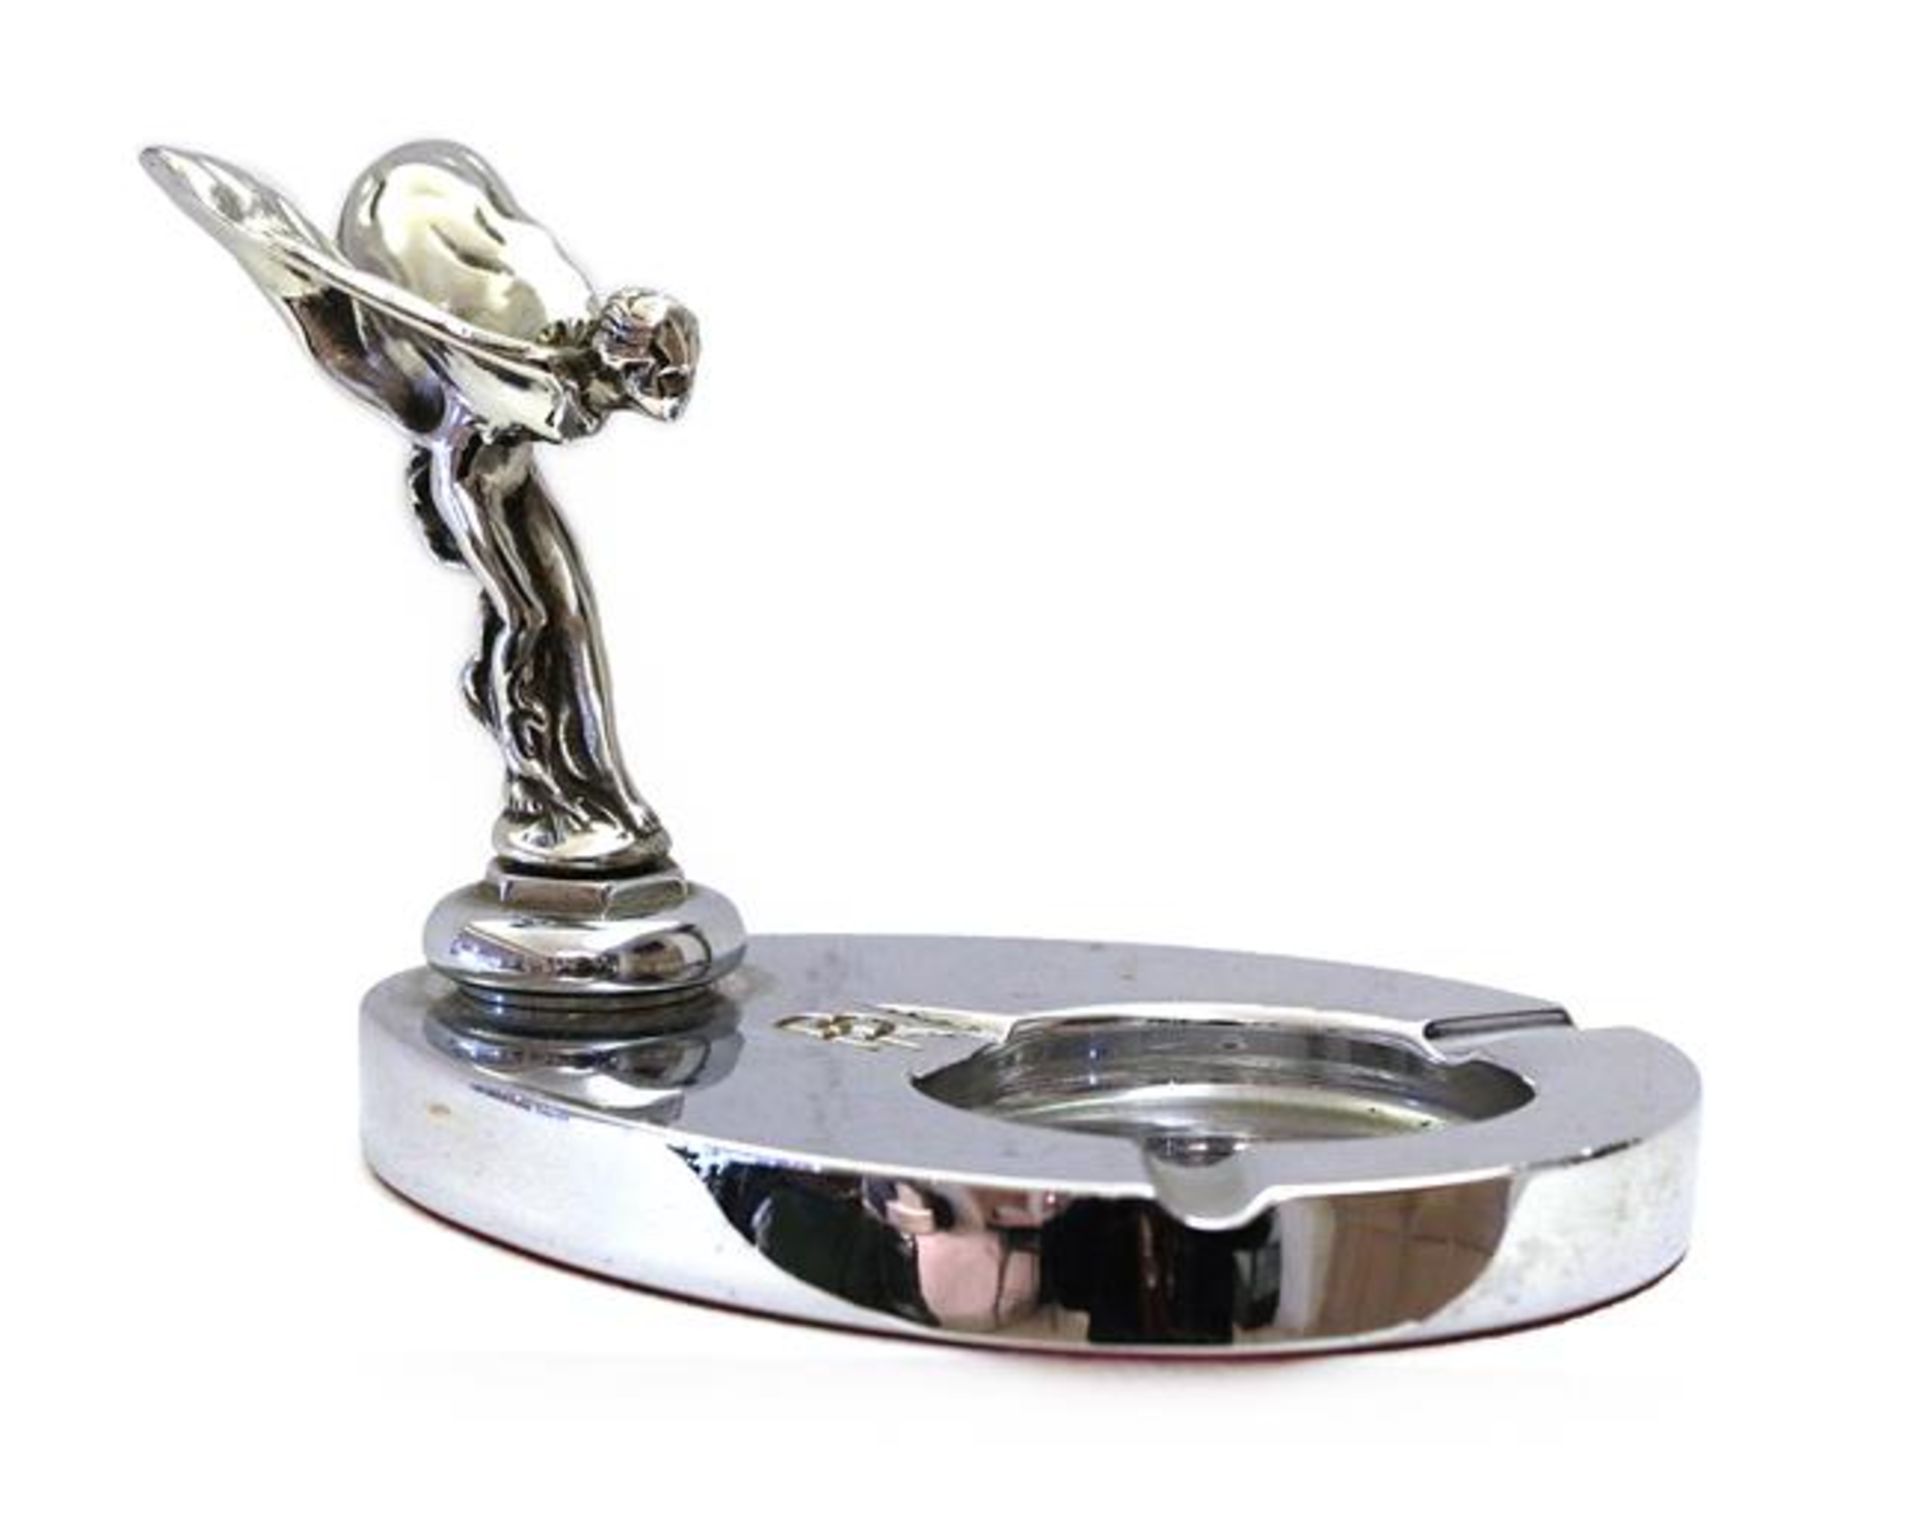 Rolls-Royce: A Chrome-Plated Ashtray, modelled as the Spirit of Ecstasy, mounted on an oval base